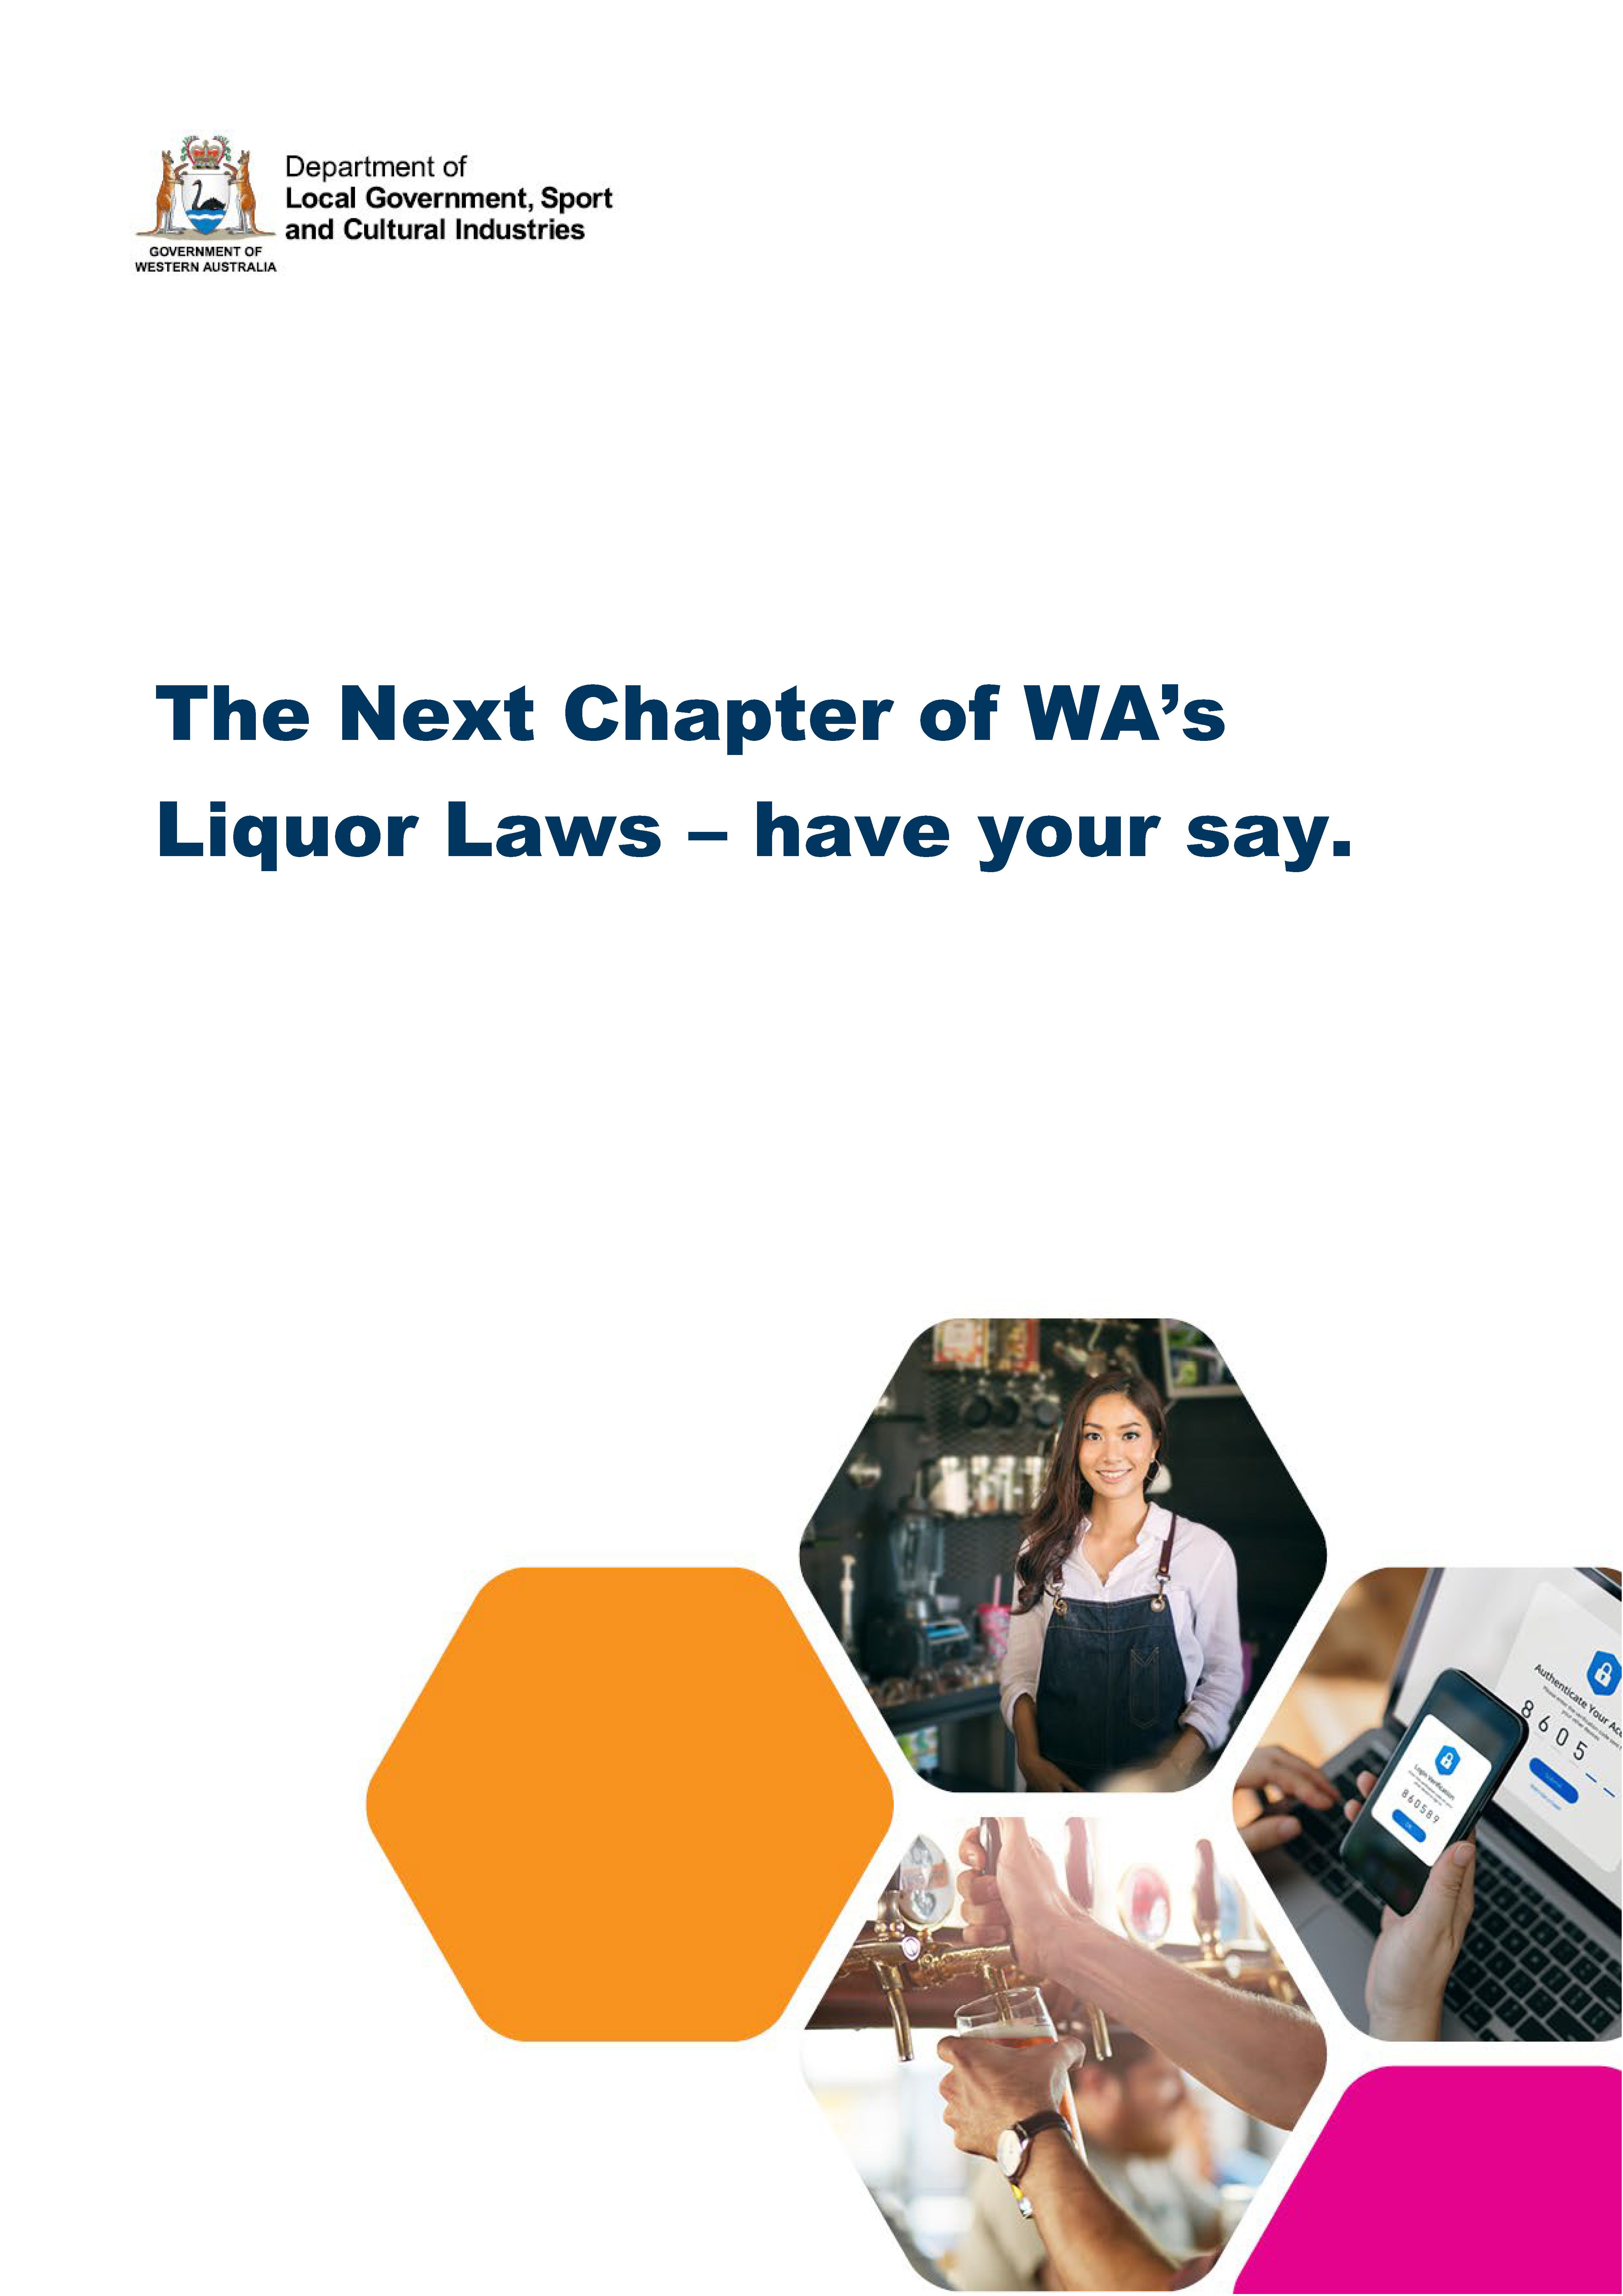 The Next Chapter of WA's Liquor Laws — have your say cover